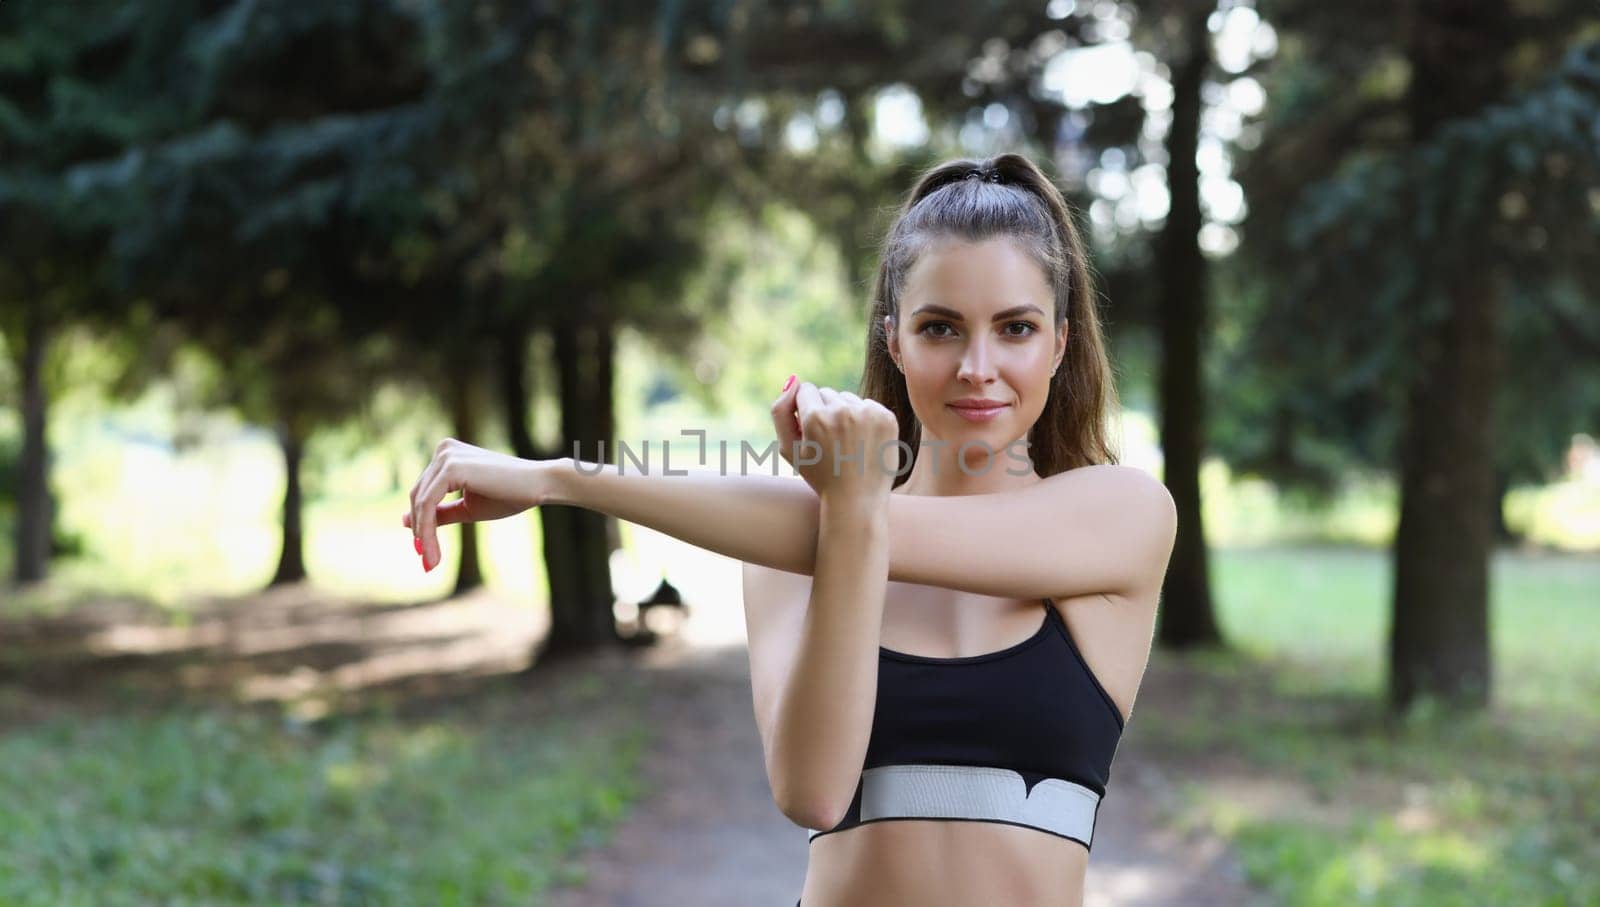 Young woman athlete stretches her hands before sports jog in park. Outdoor sports concept